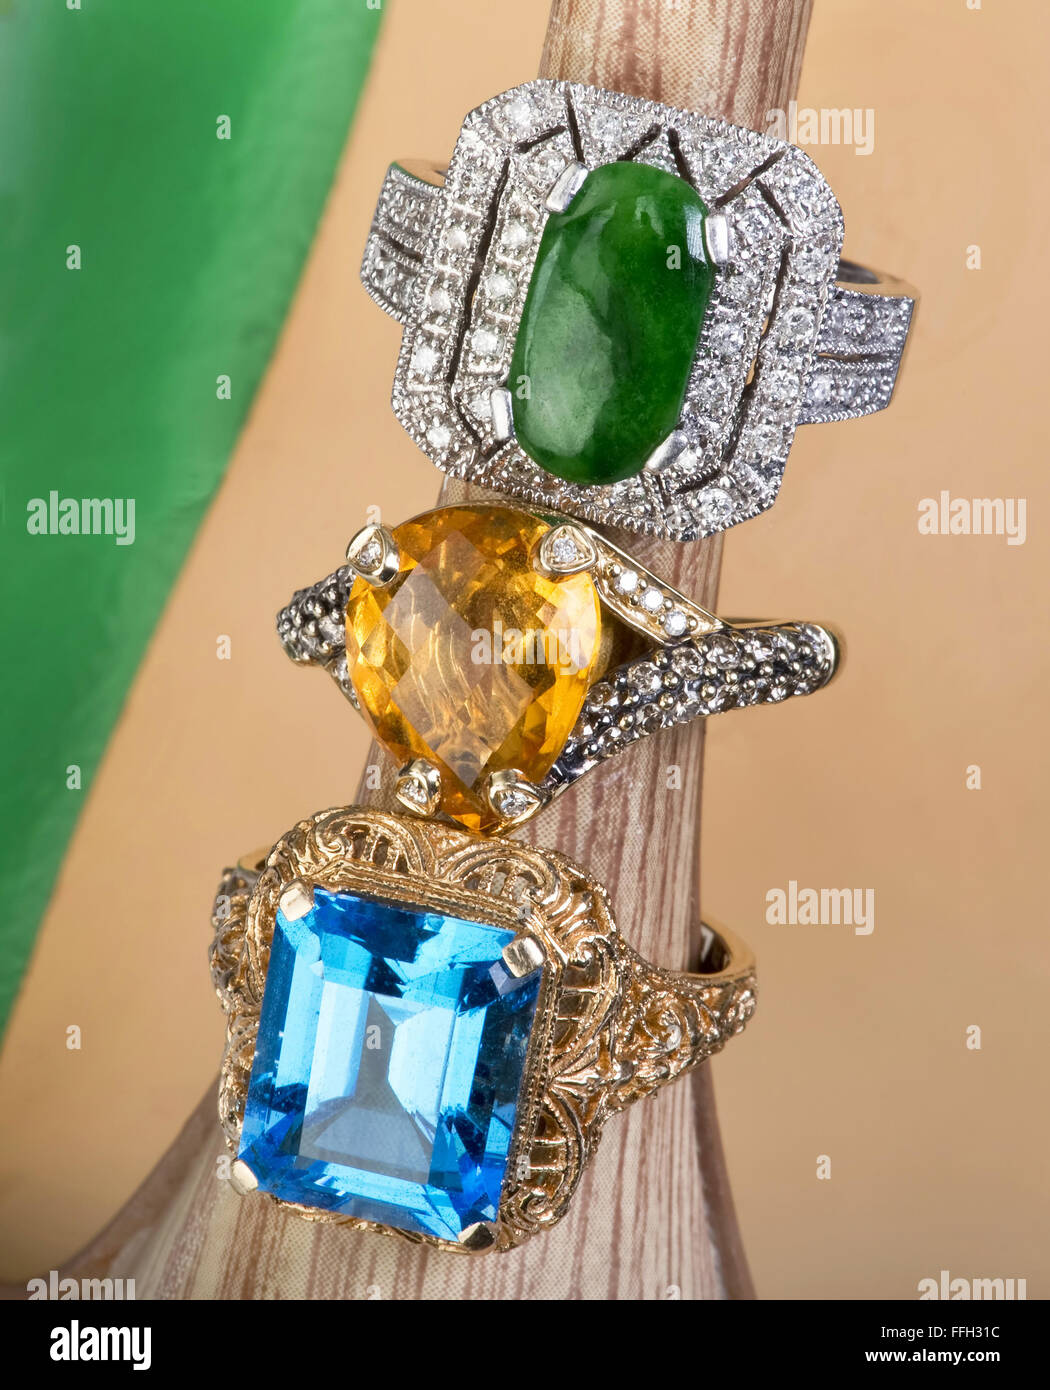 Blue Topaz, yellow citrine and imperial green jade rings Stock Photo - Alamy